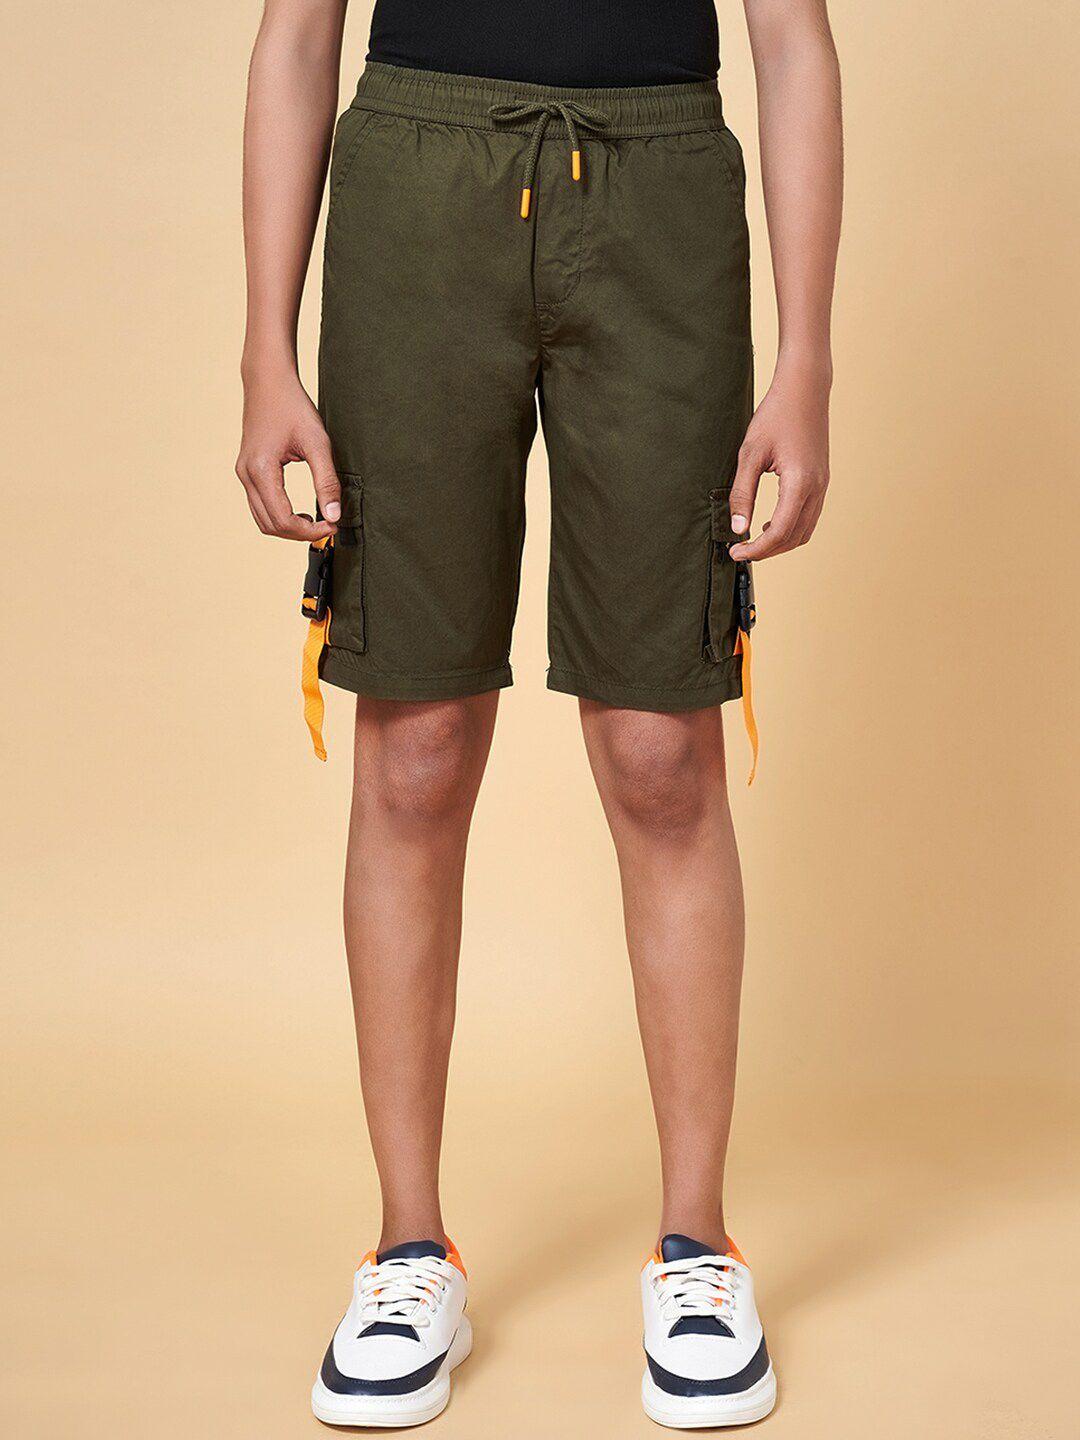 coolsters by pantaloons boys olive green sports shorts